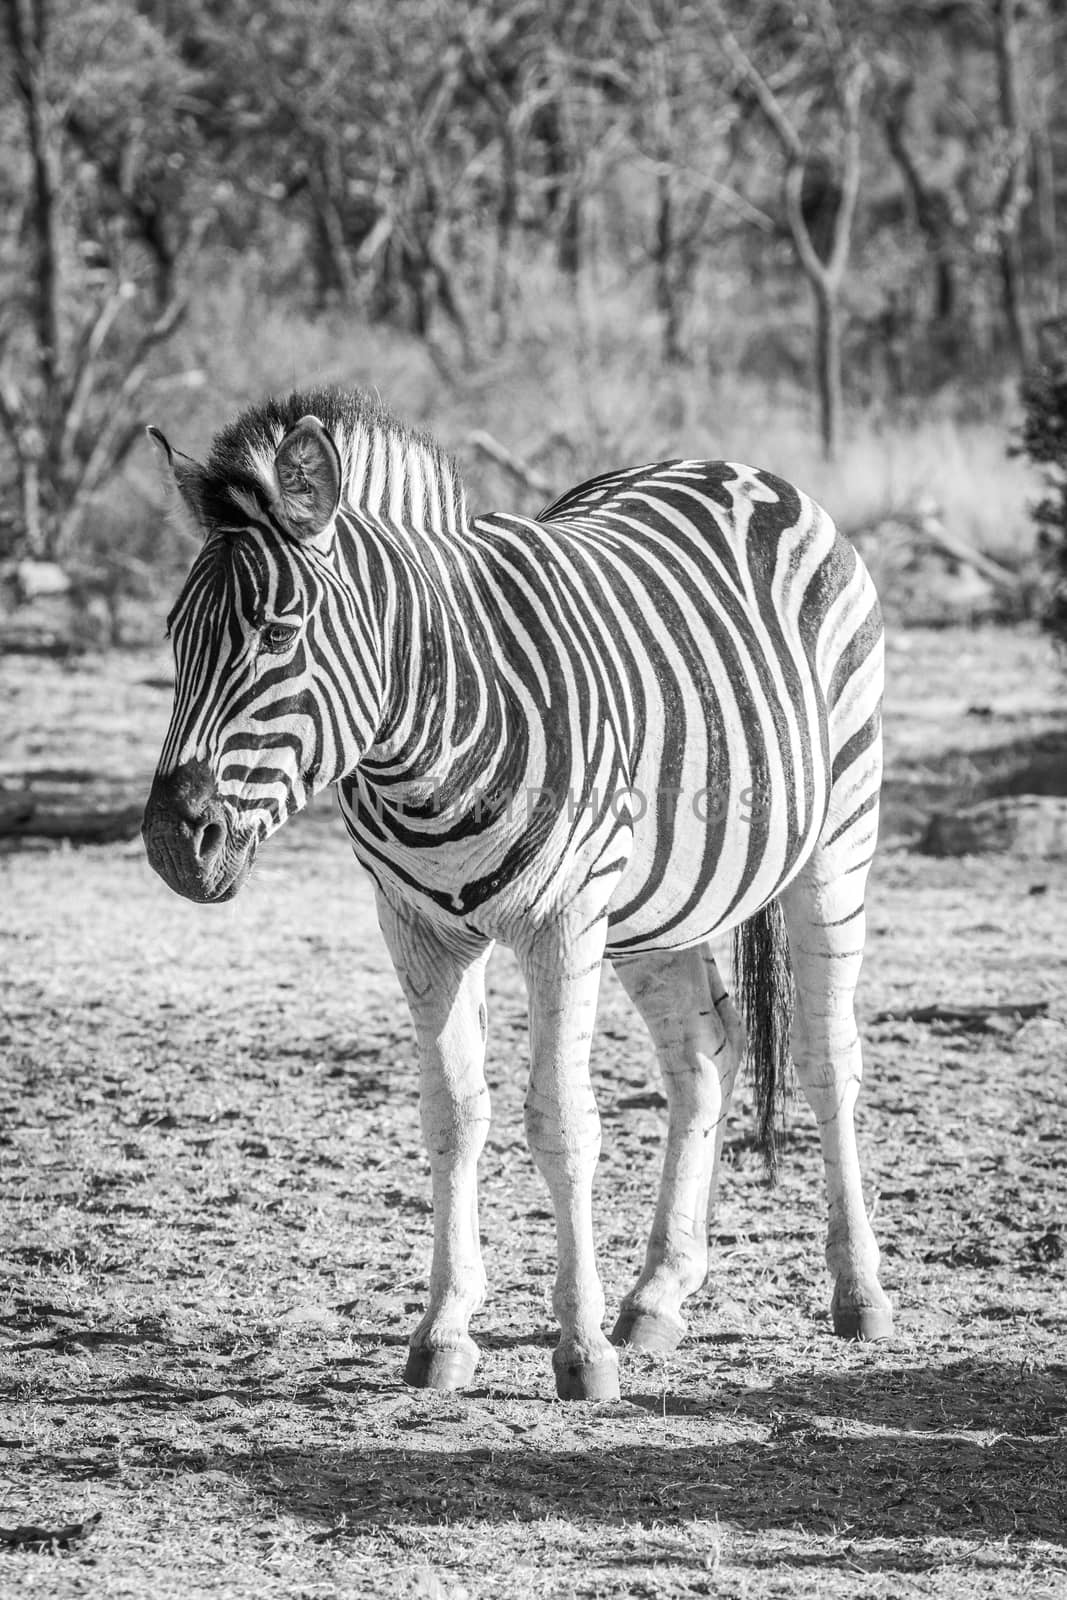 Zebra standing in the grass in black and white in the Welgevonden game reserve. South Africa.